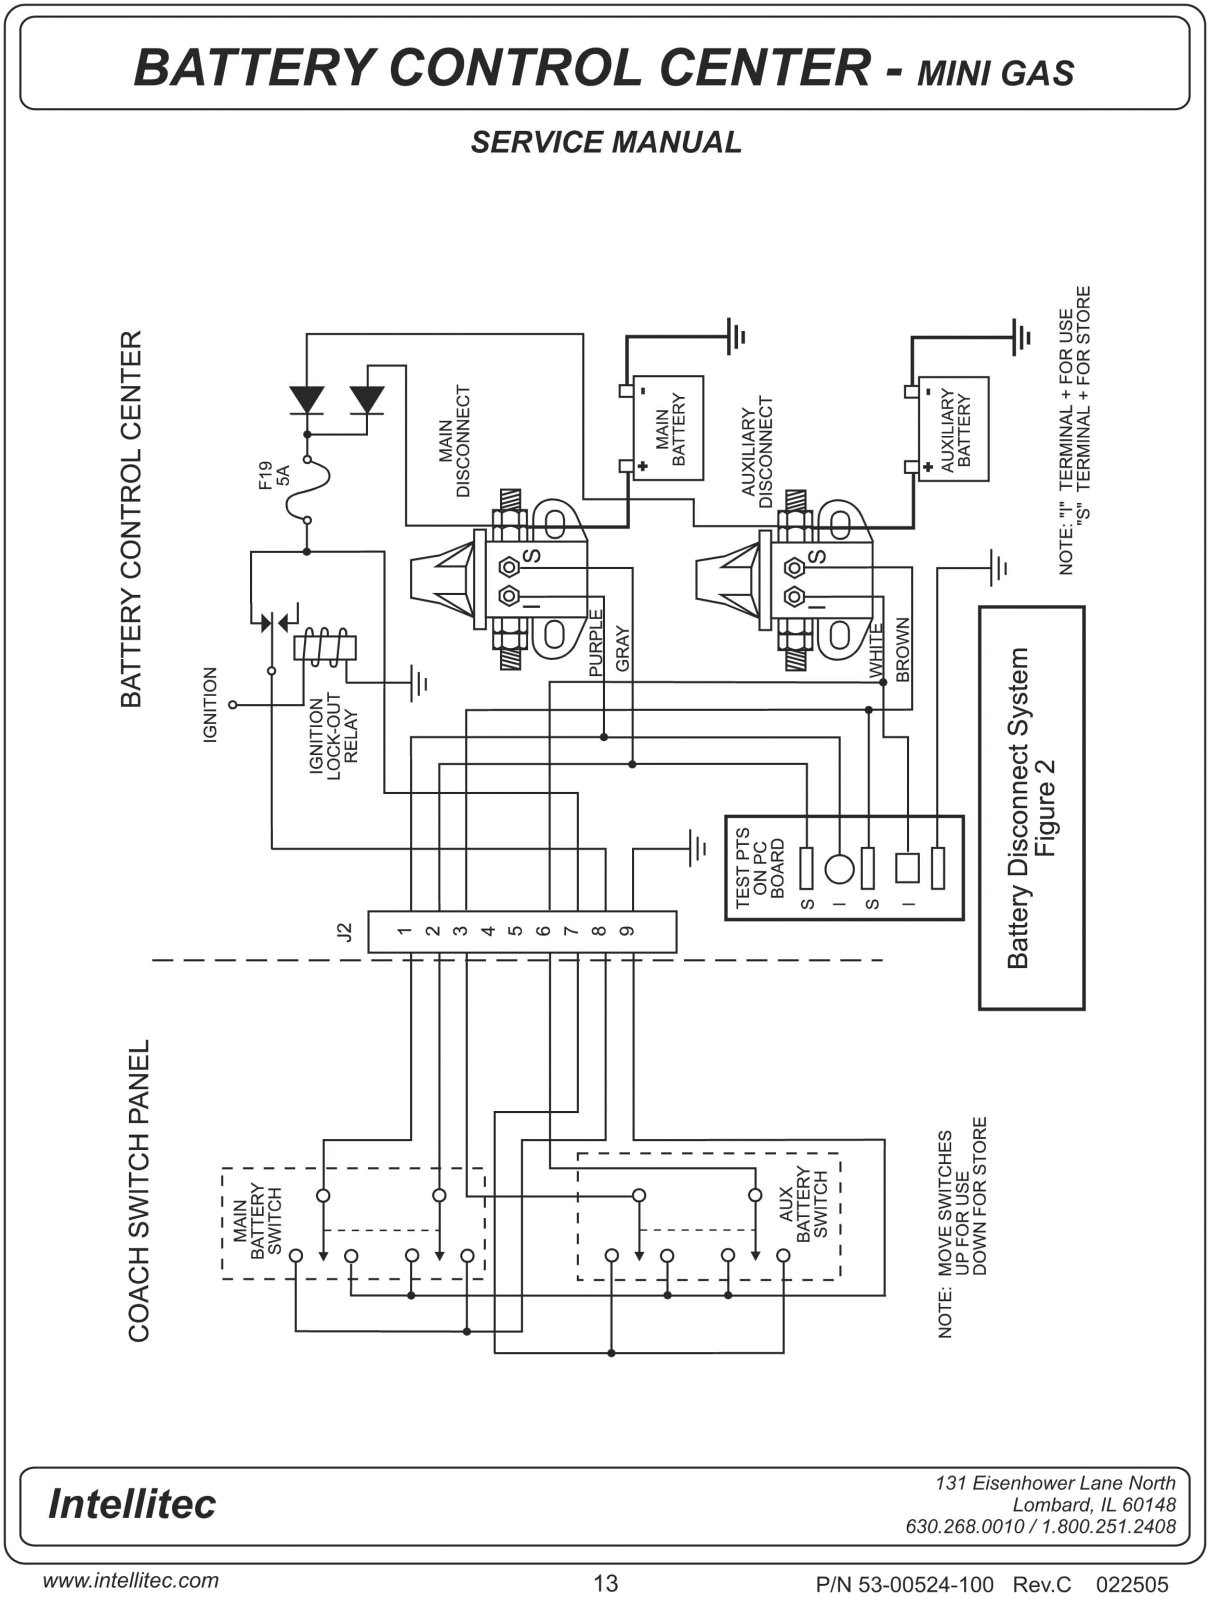 Workhorse W22 Chassis Wiring Diagram 2011 Workhorse Wiring Diagram Wiring Diagram View